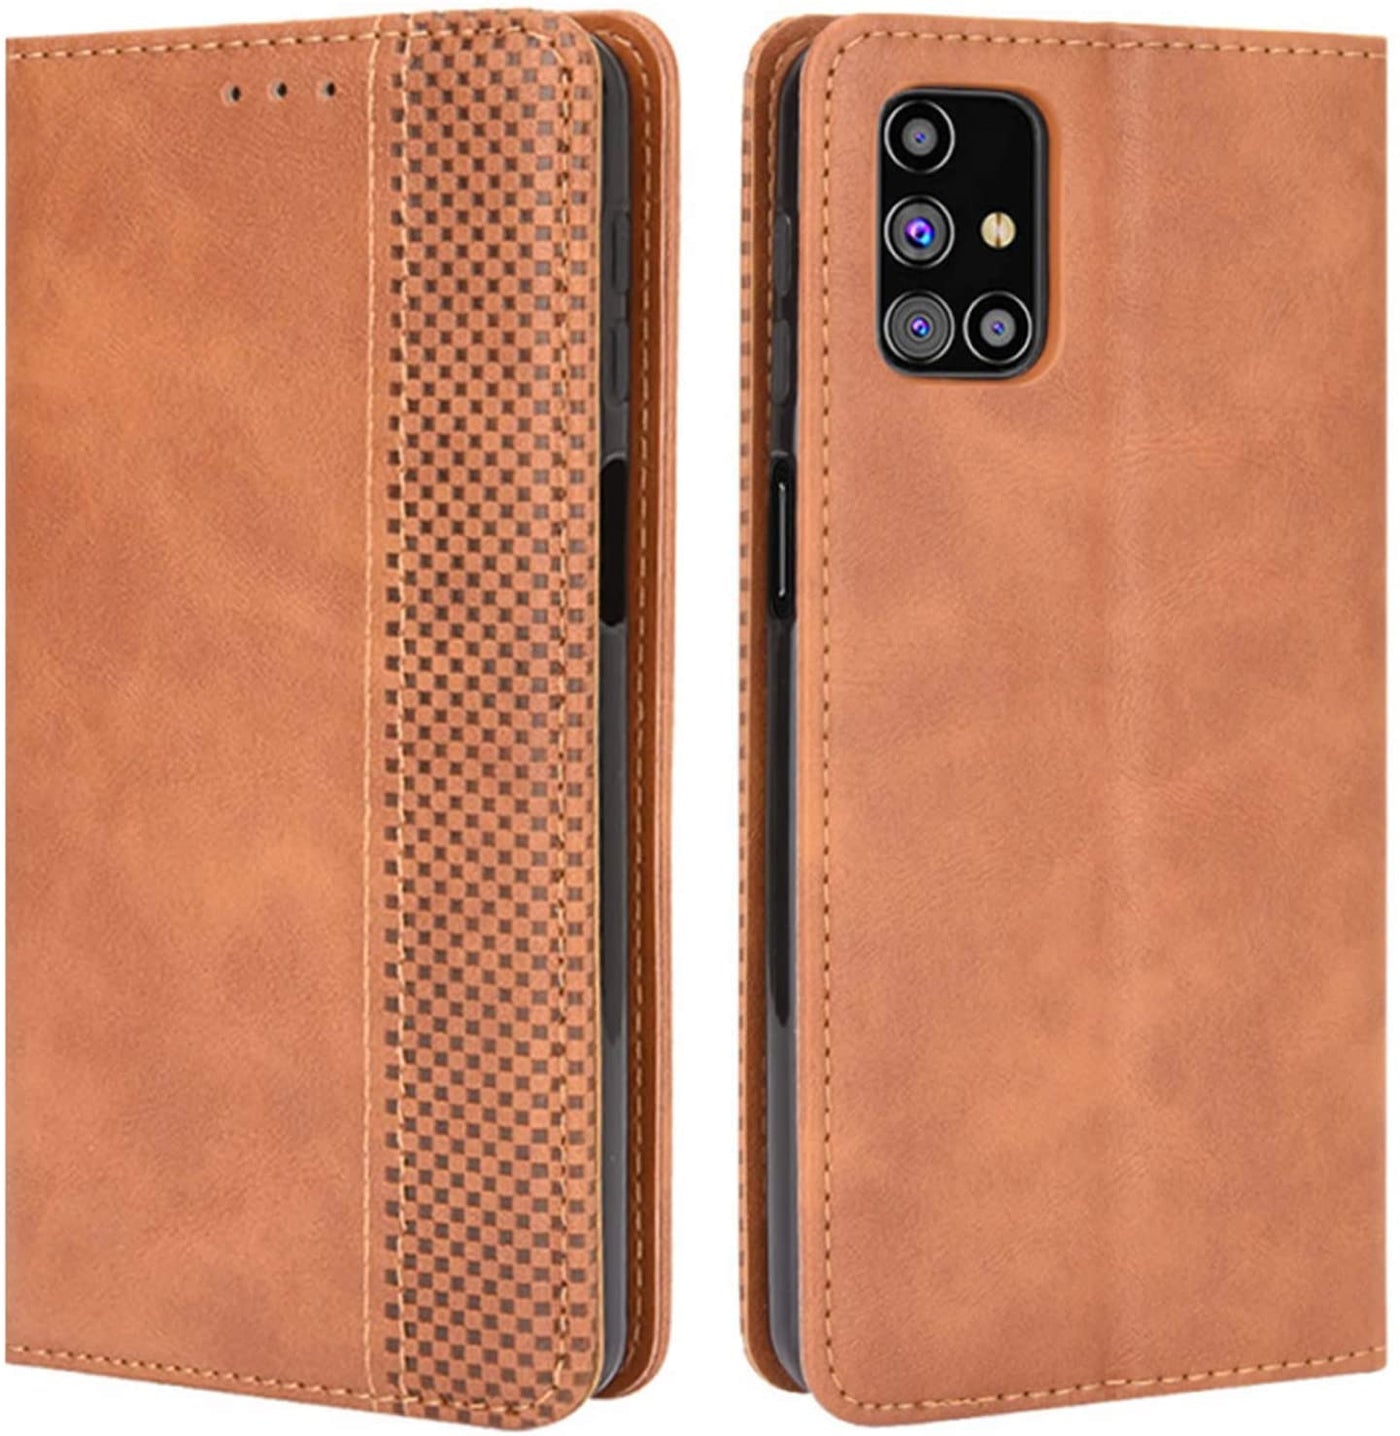 Samsung Galaxy M51 brown color leather wallet flip cover case By excelsior